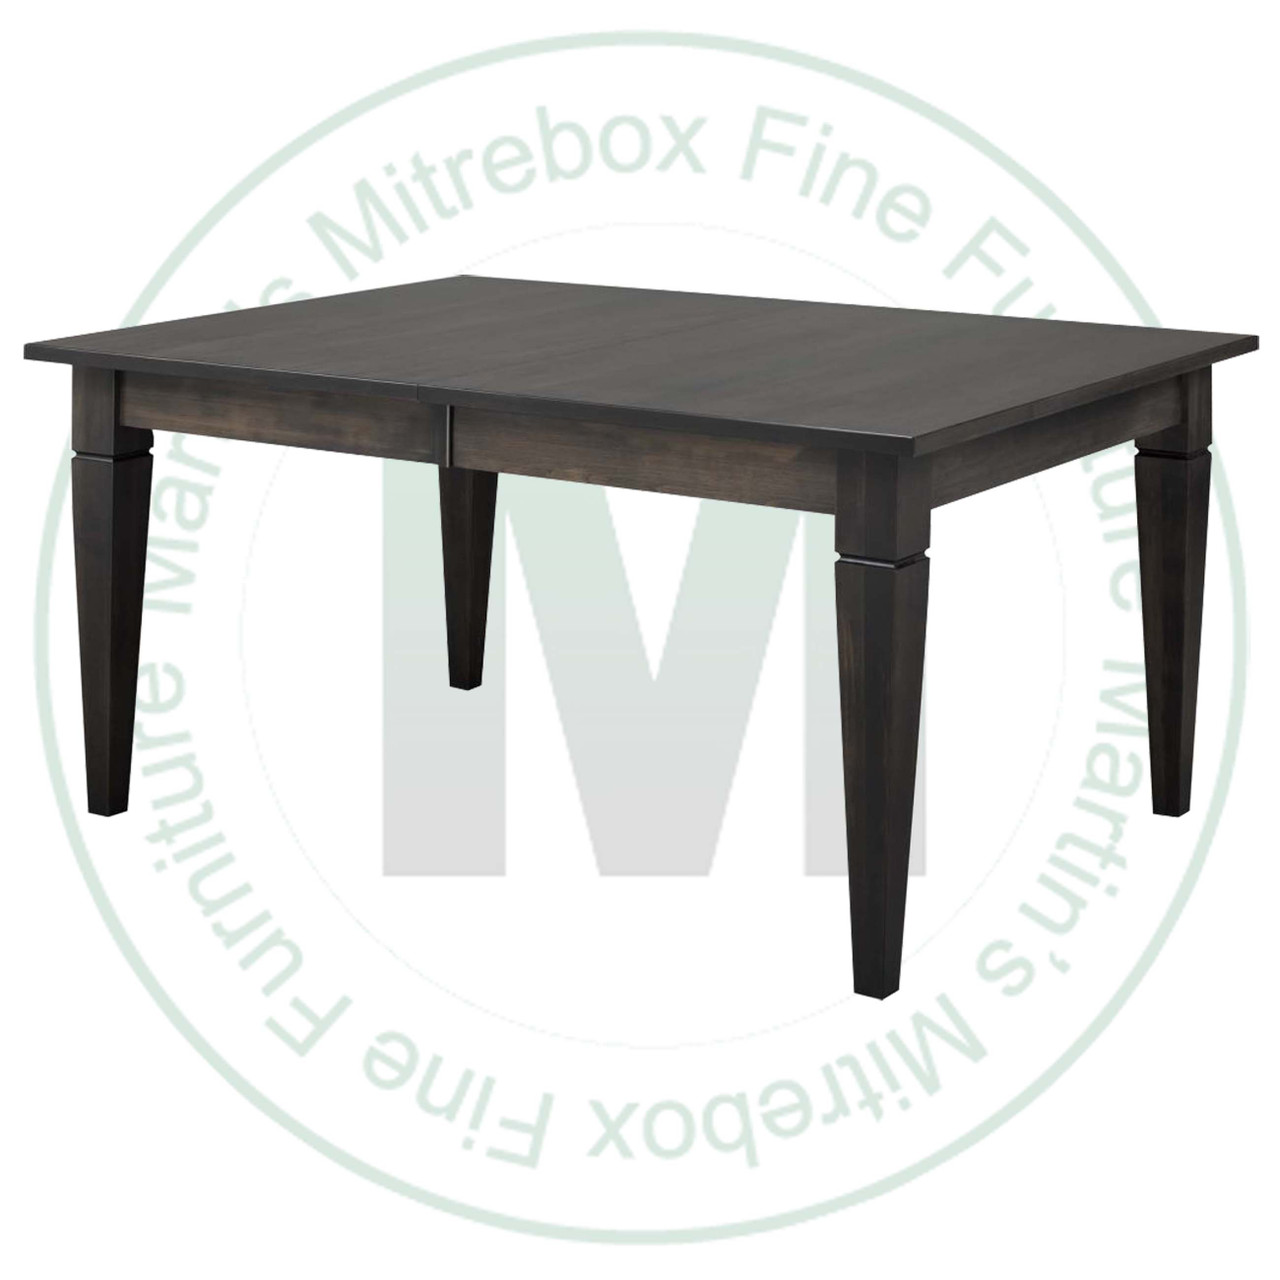 Wormy Maple Reesor Extension Harvest Table 42''D x 60''W x 30''H With 2 - 12'' Leaves Table Has 1.25'' Thick Top